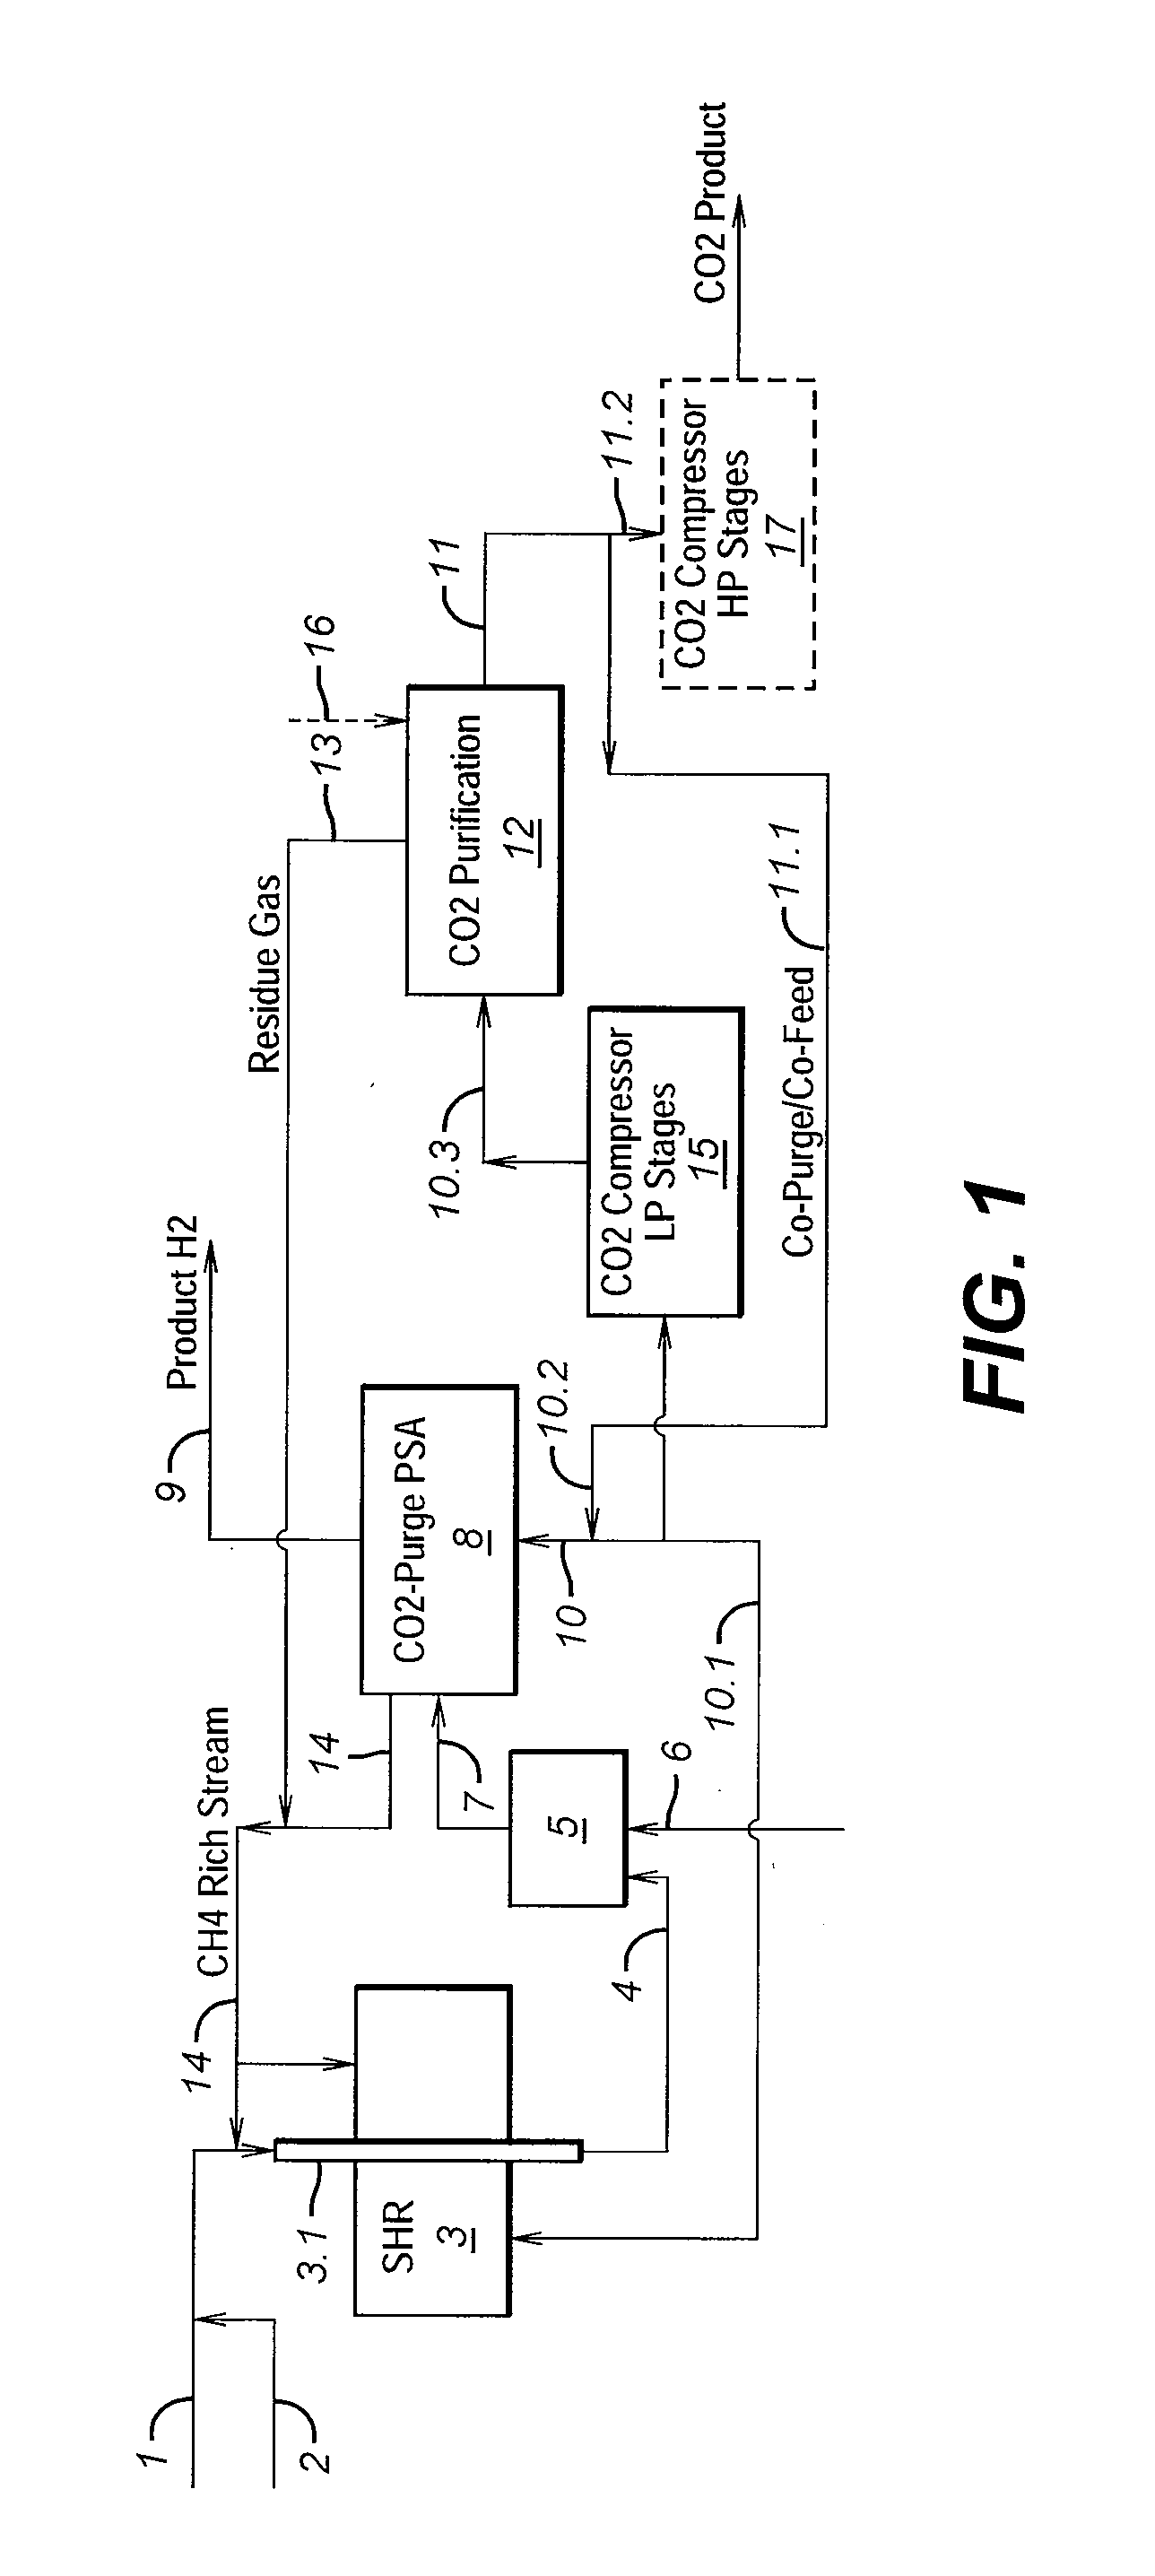 Process For The Production Of Carbon Dioxide Utilizing A Co-Purge Pressure Swing Adsorption Unit